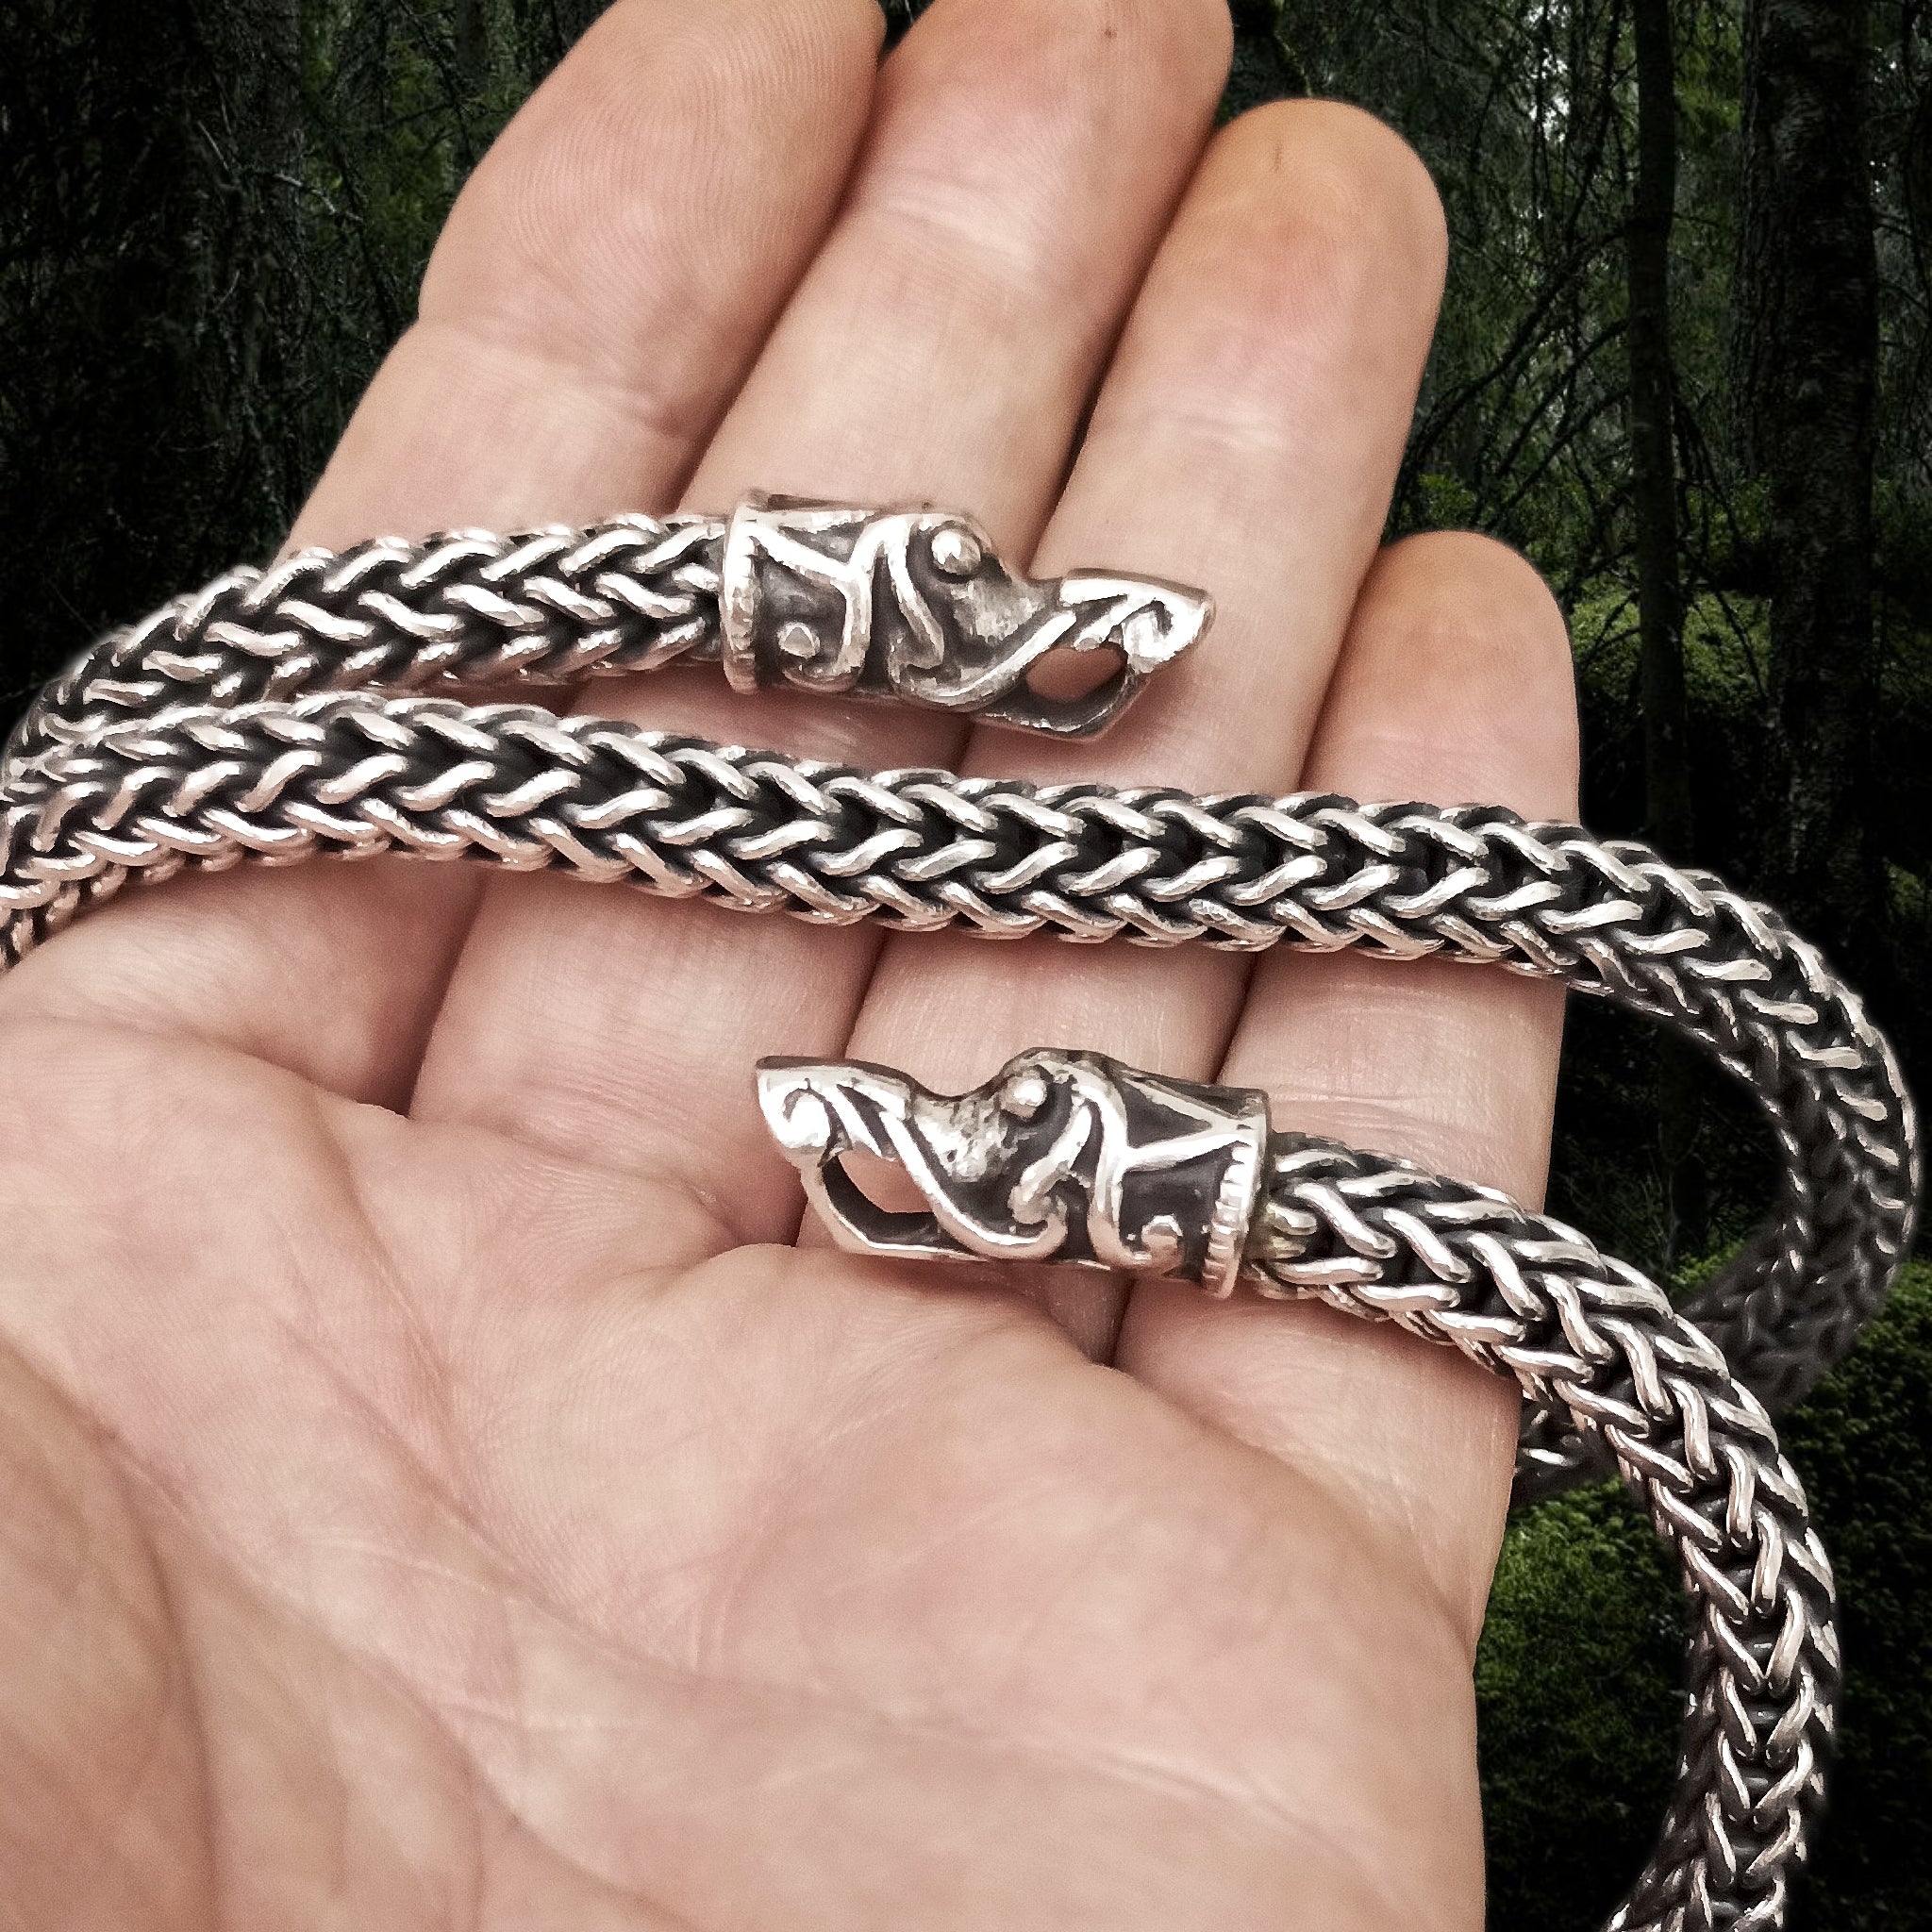 8mm Thick Silver Snake Chain Thors Hammer Necklace - Gotland Dragon Heads on Hand